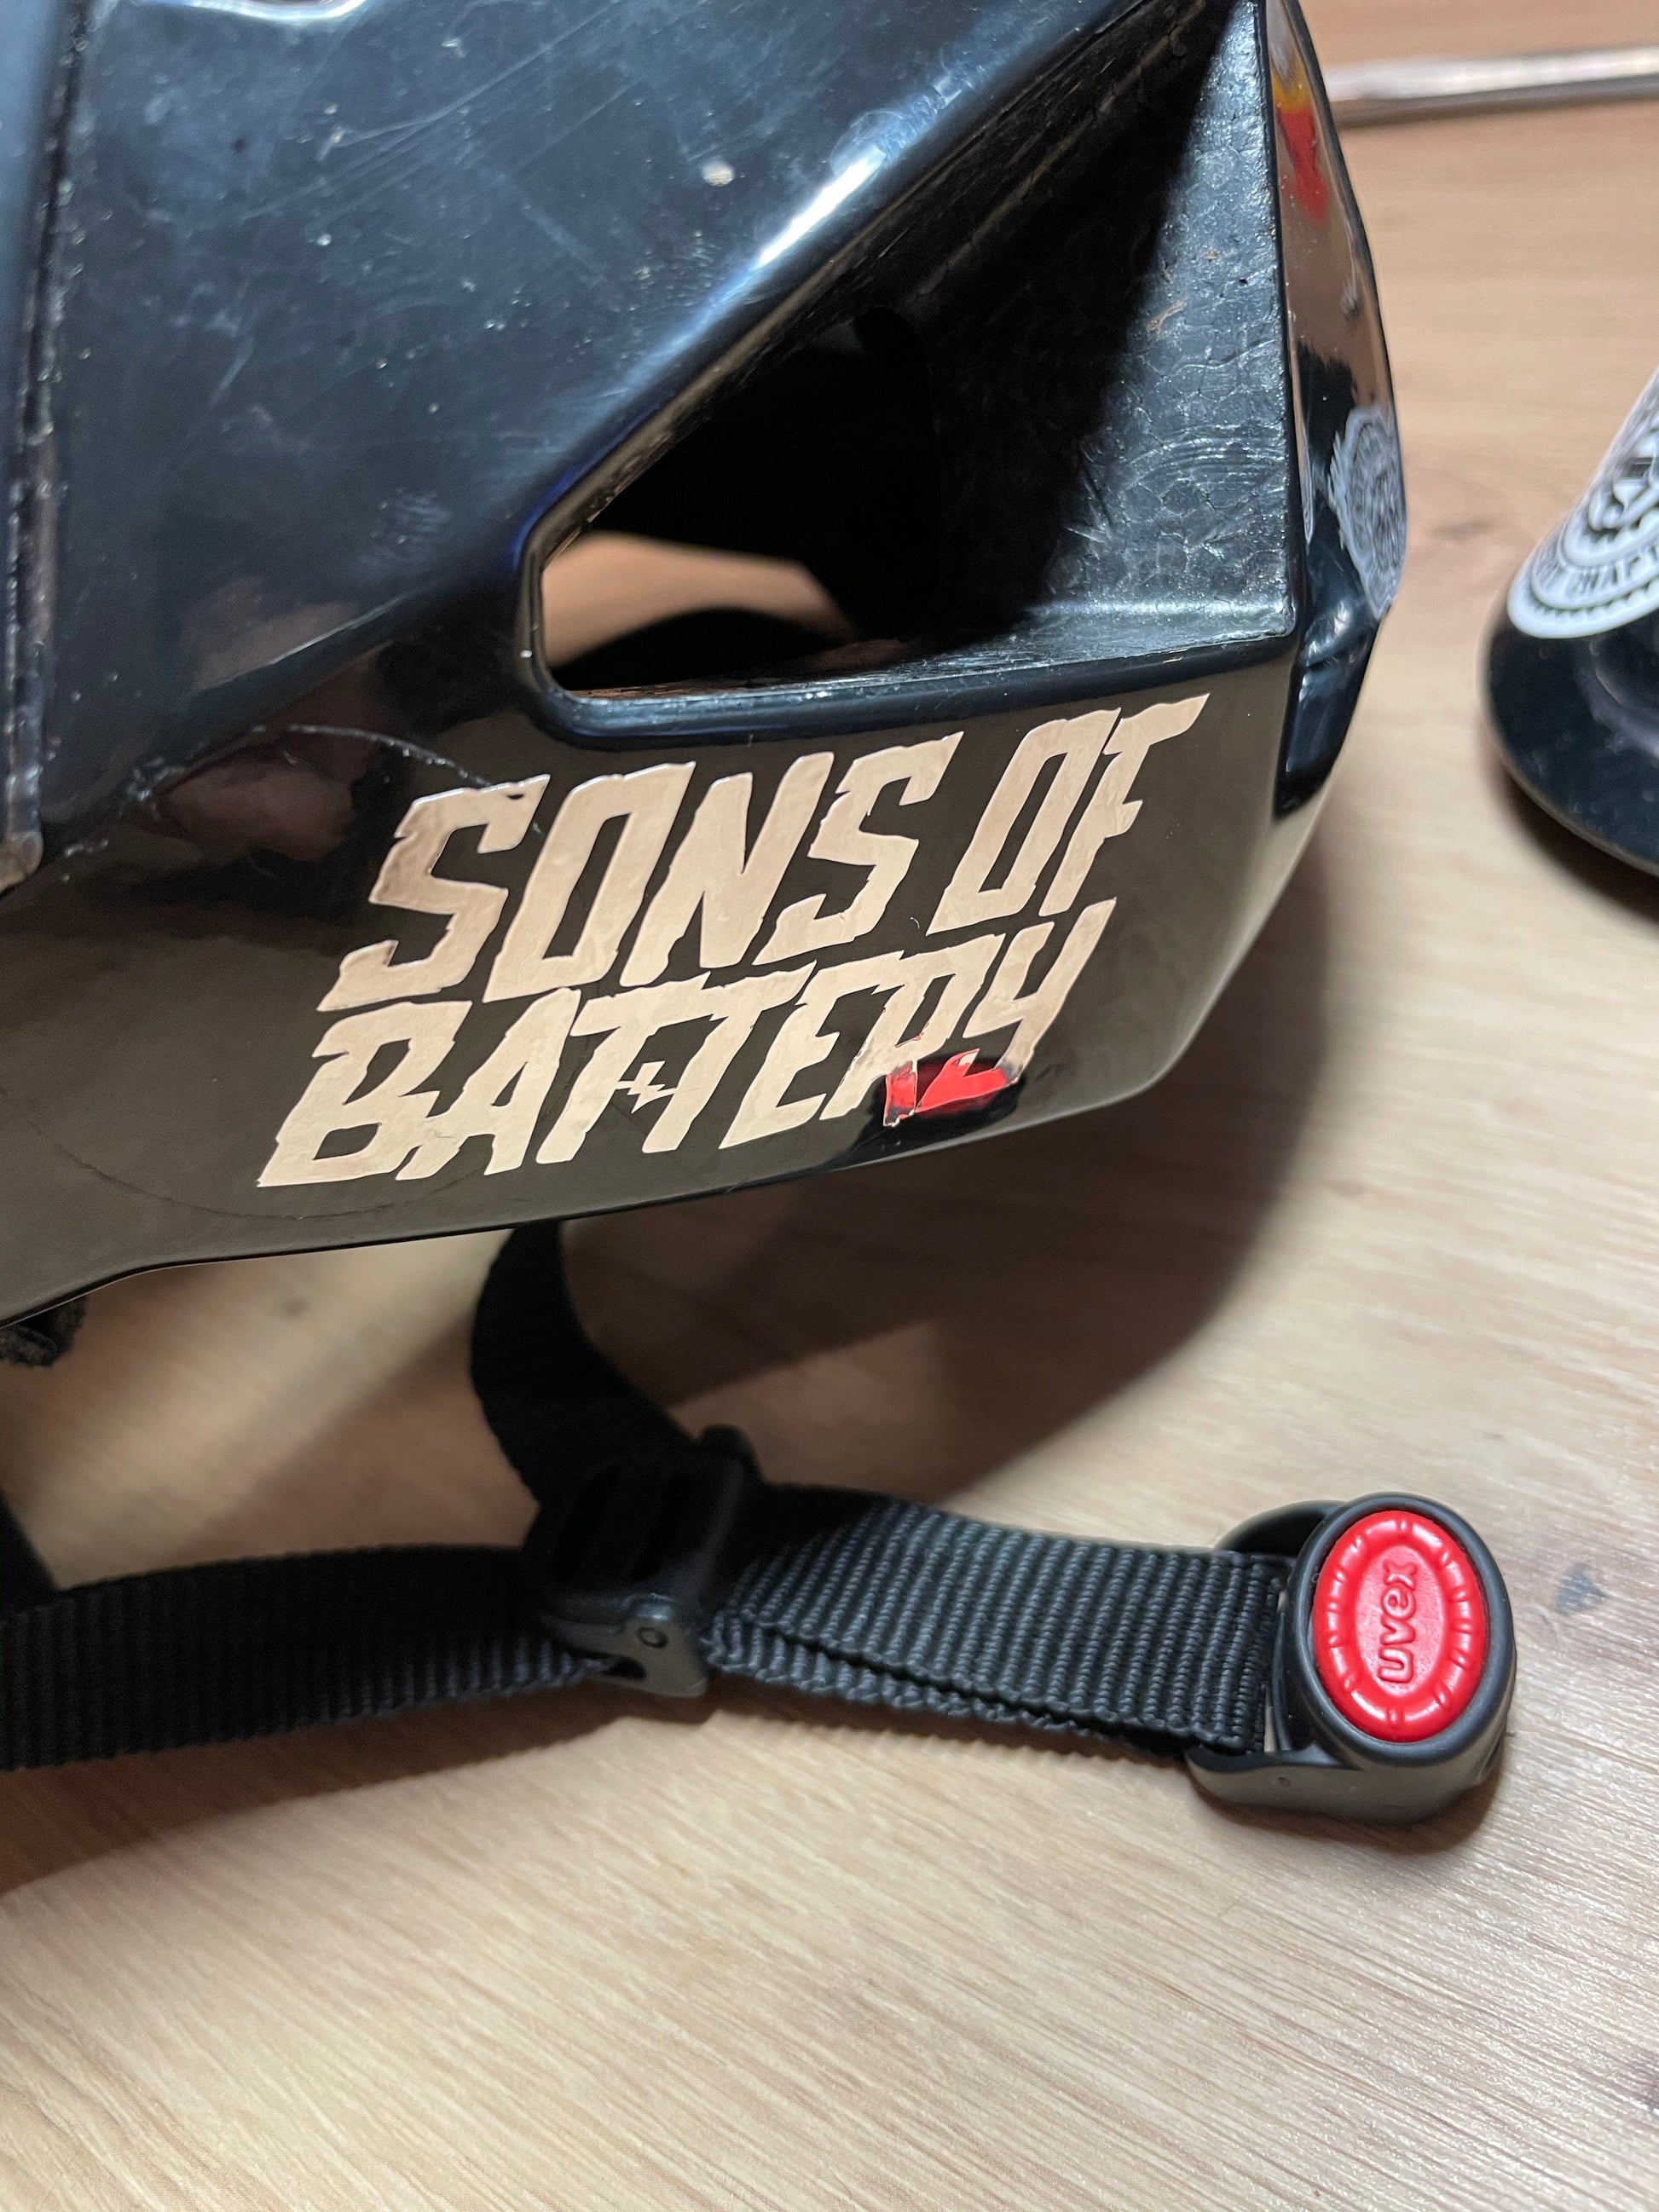 Sons of Battery Signature Folien - Sons of Battery® - E-MTB Brand & Community